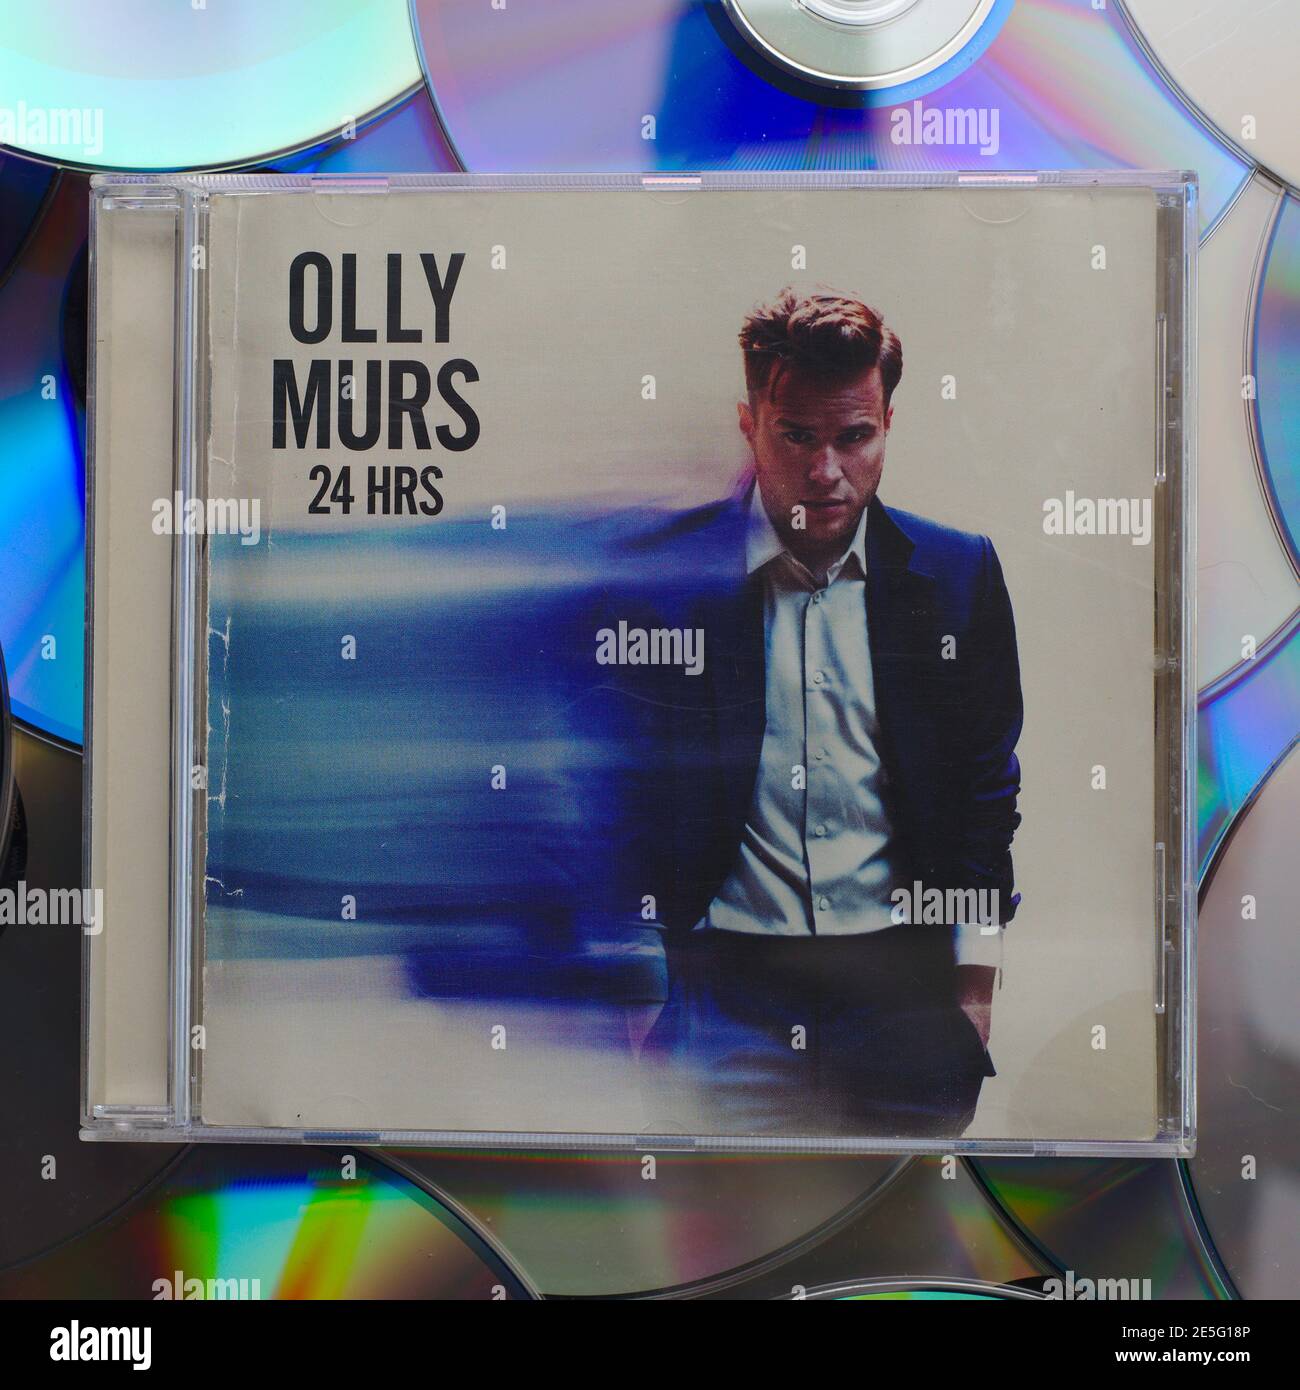 A copy of the Olly Murs album 24 Hrs on CD Stock Photo - Alamy